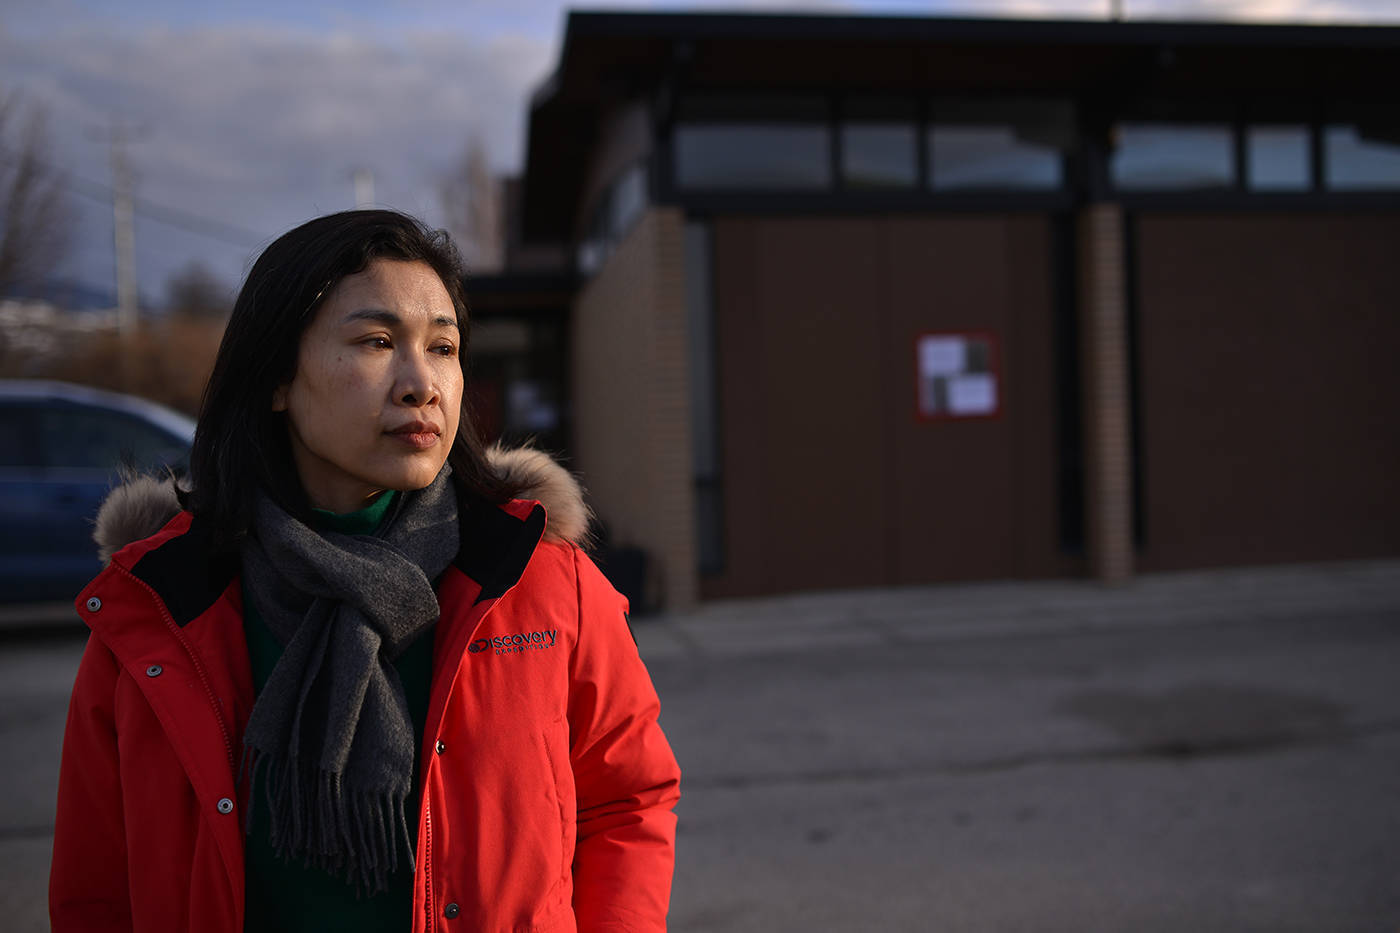 In February 2020, members of the Penticton Chinese community spoke out after an alleged racially-motivated attack left them with broken windows and unanswered questions. Pictured above is Shui Kei Ma, who spoke in February 2020 on behalf of the community. (Phil McLachlan/Penticton Western News)